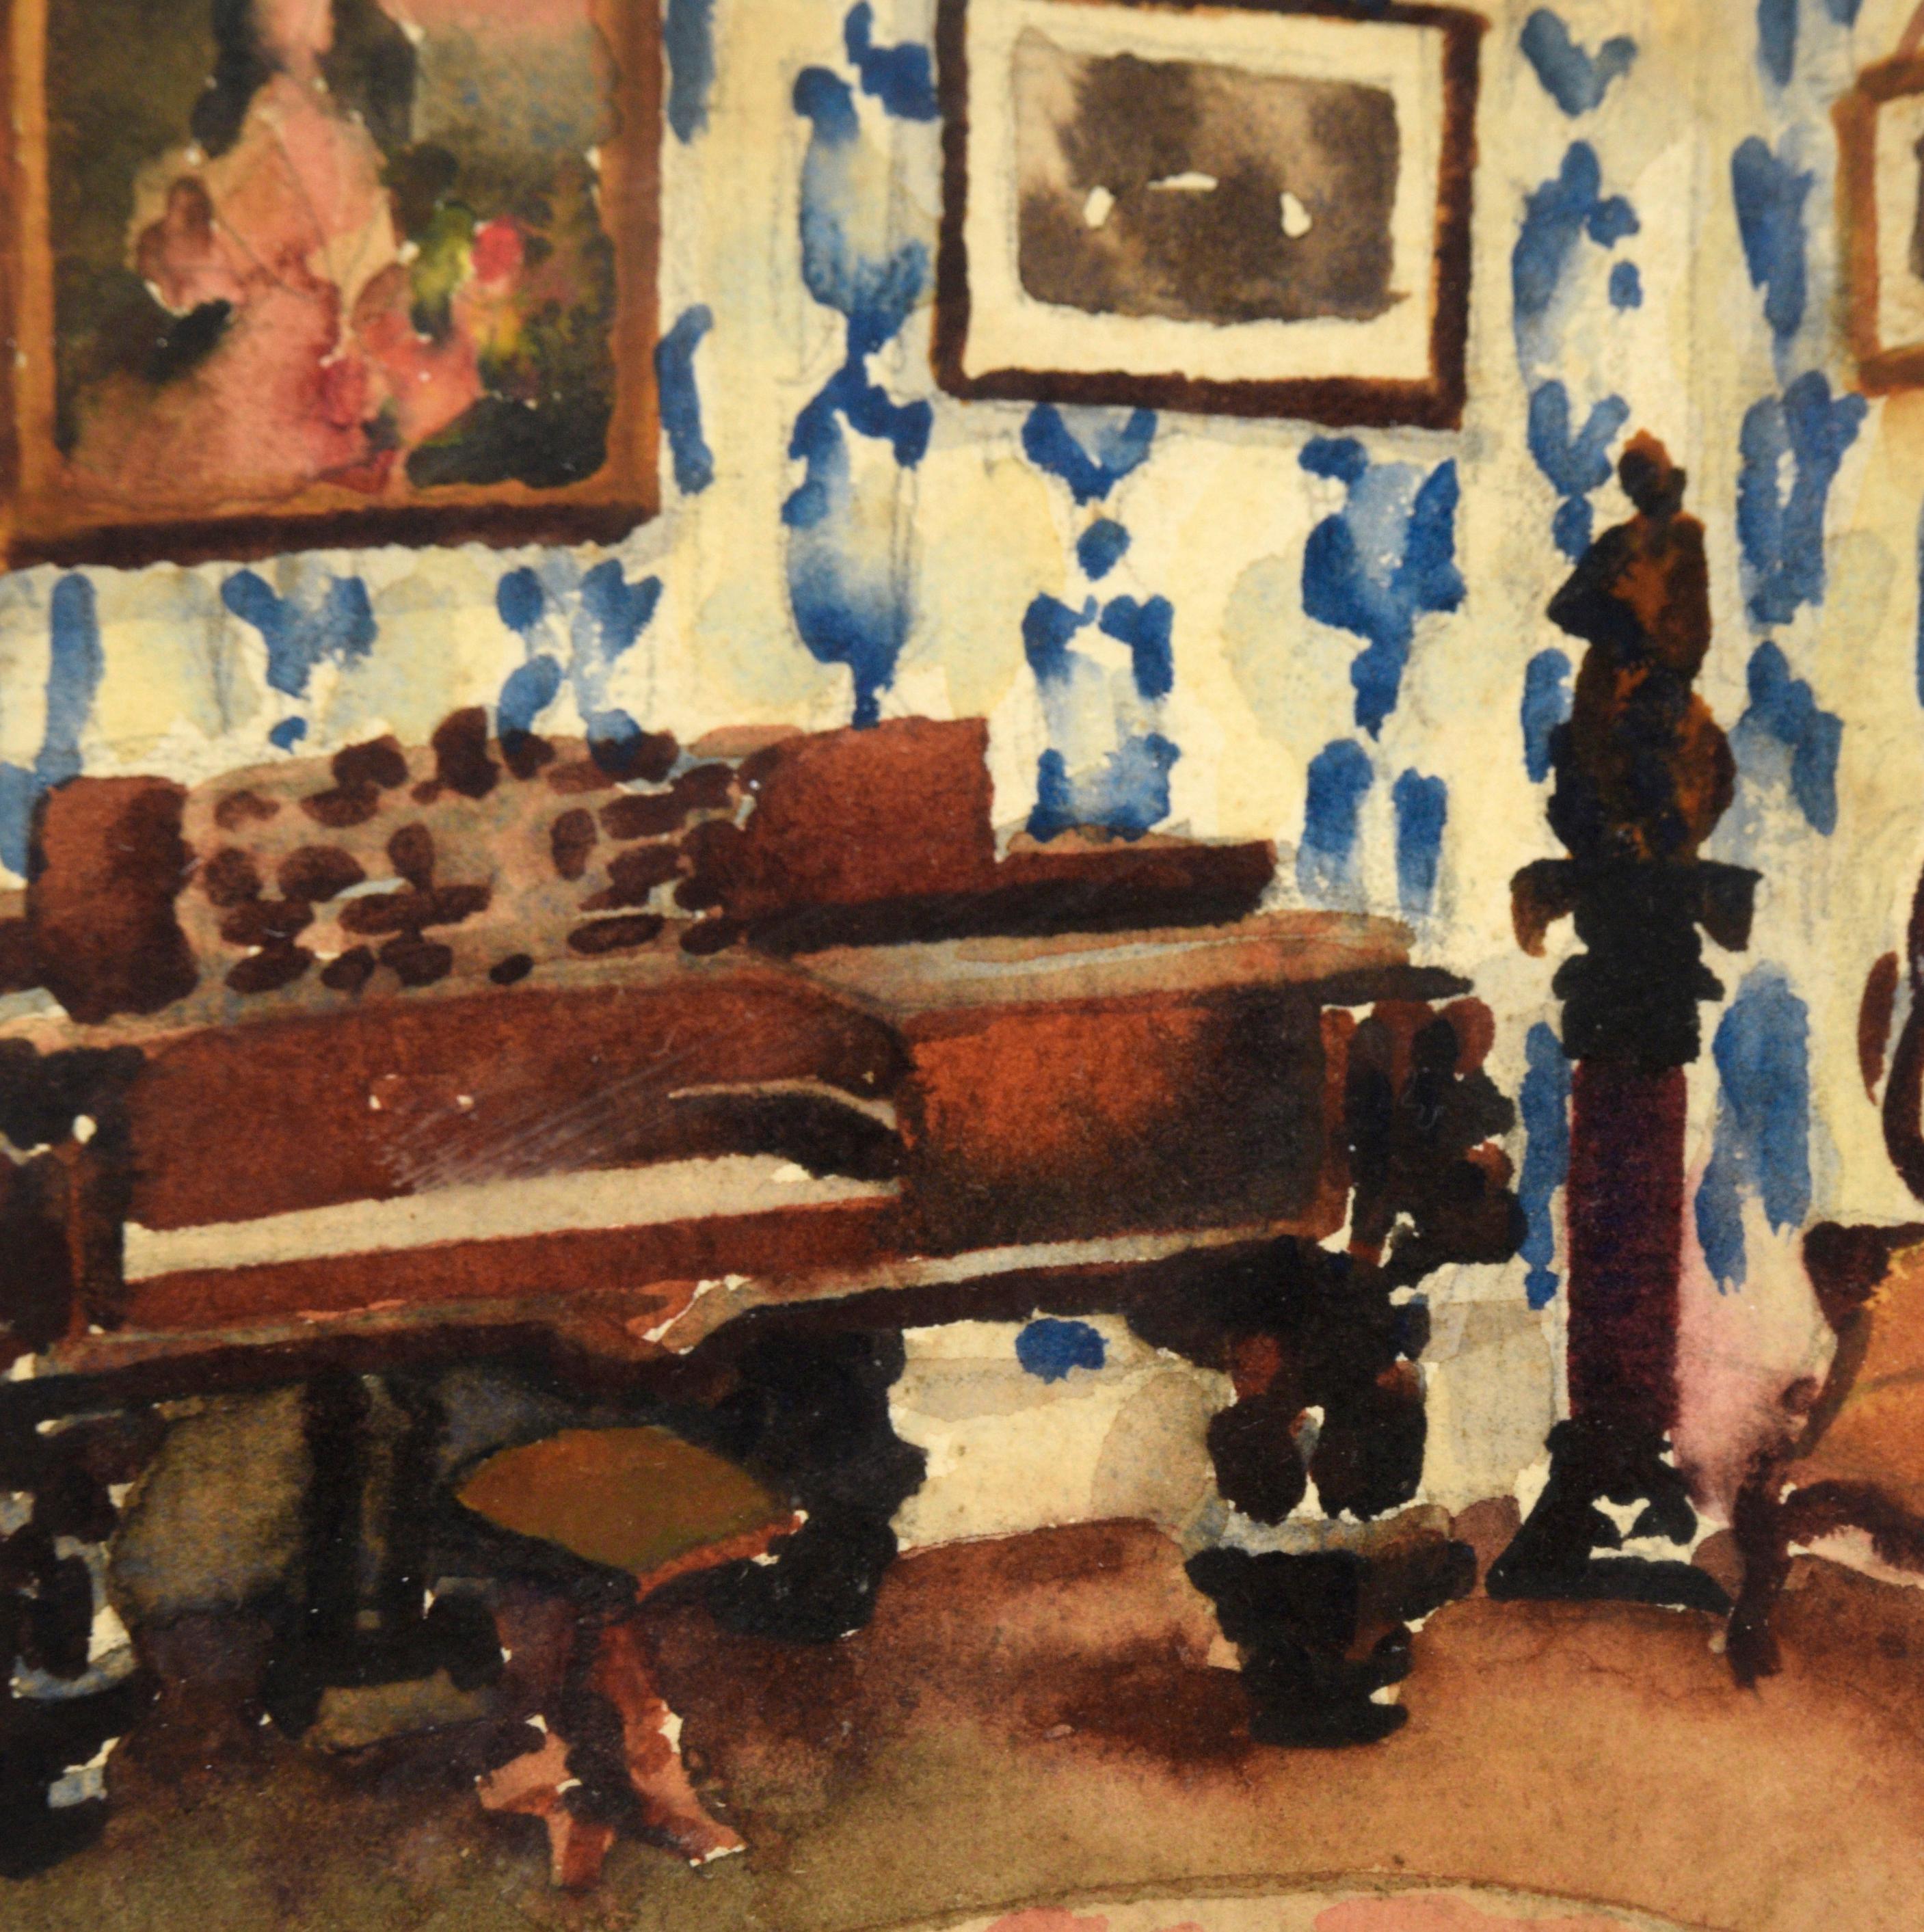 Pair of Interior Scenes of a Victorian Home - Watercolor on Heavy Paper - Brown Interior Art by David Mode Payne